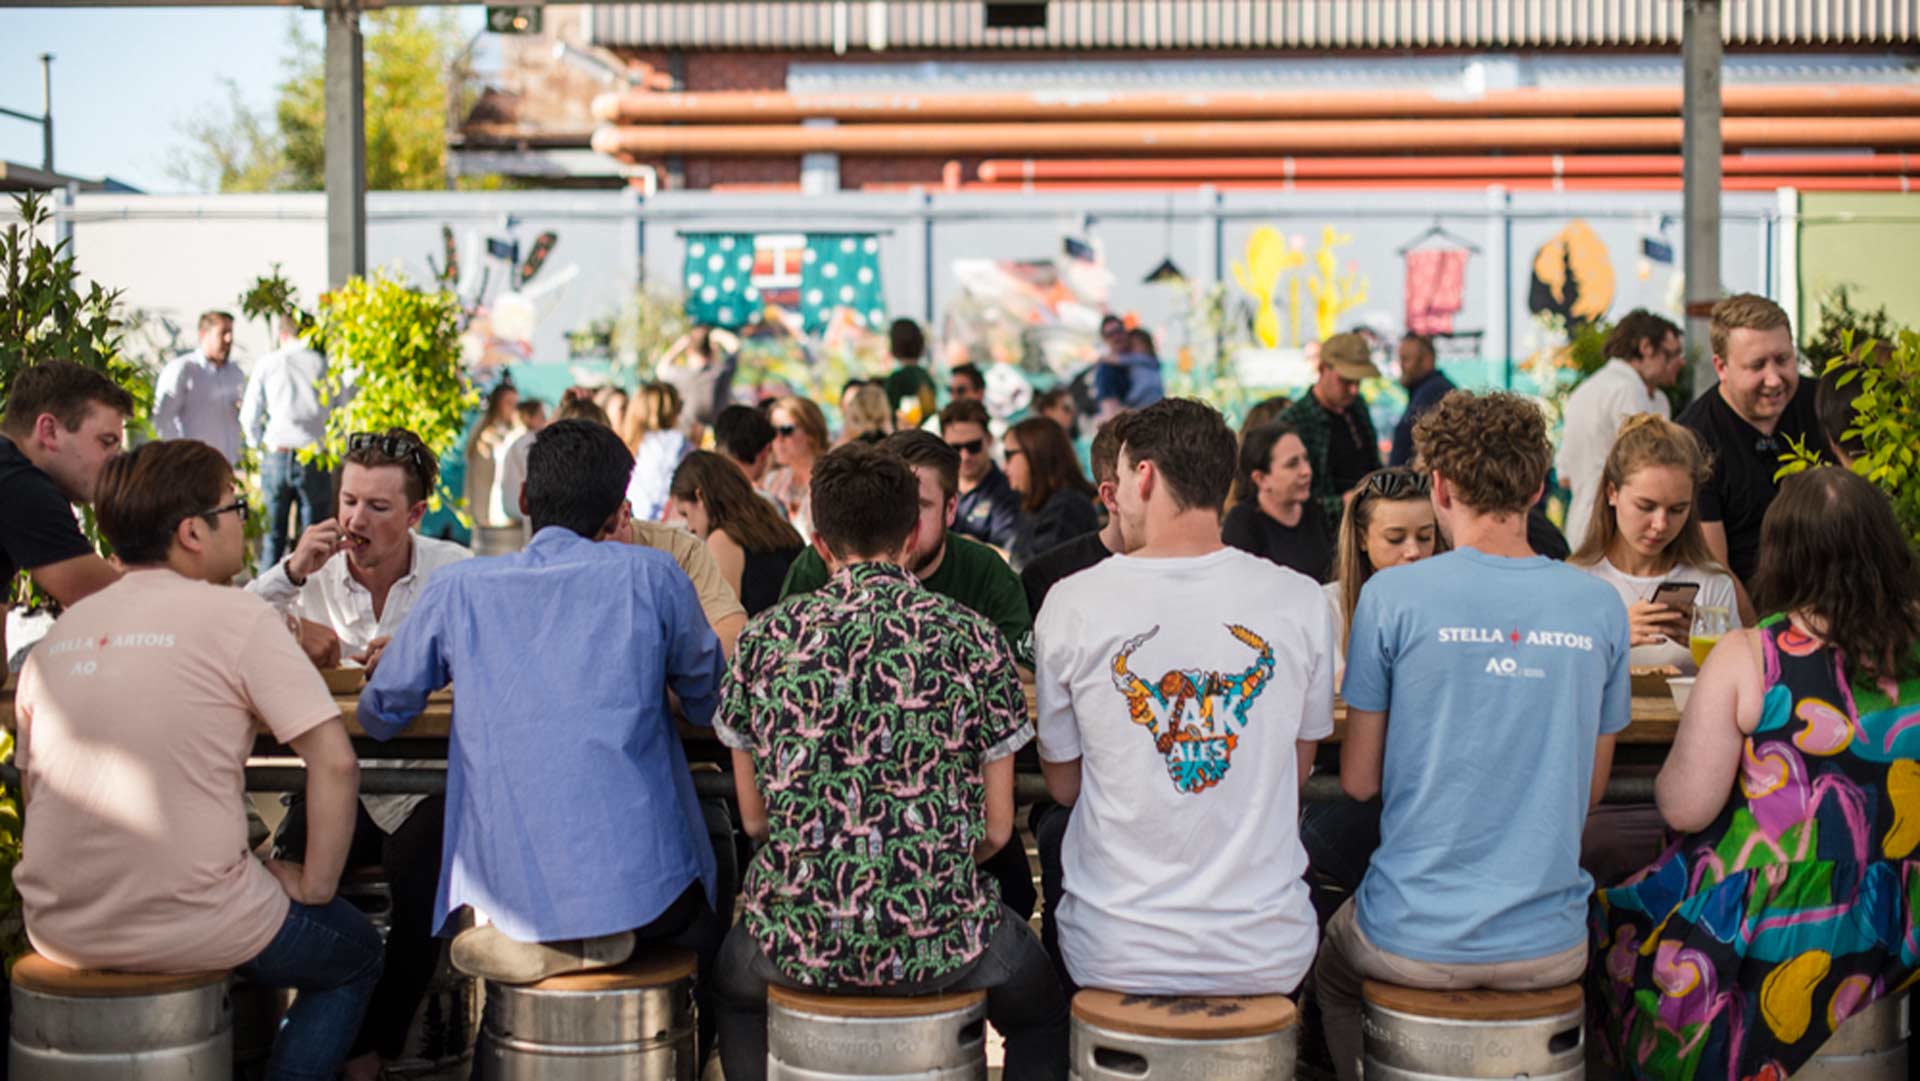 Welcome to Brunswick Is the Inner North's New Fairy Light-Lit Food Truck Park and Beer Garden